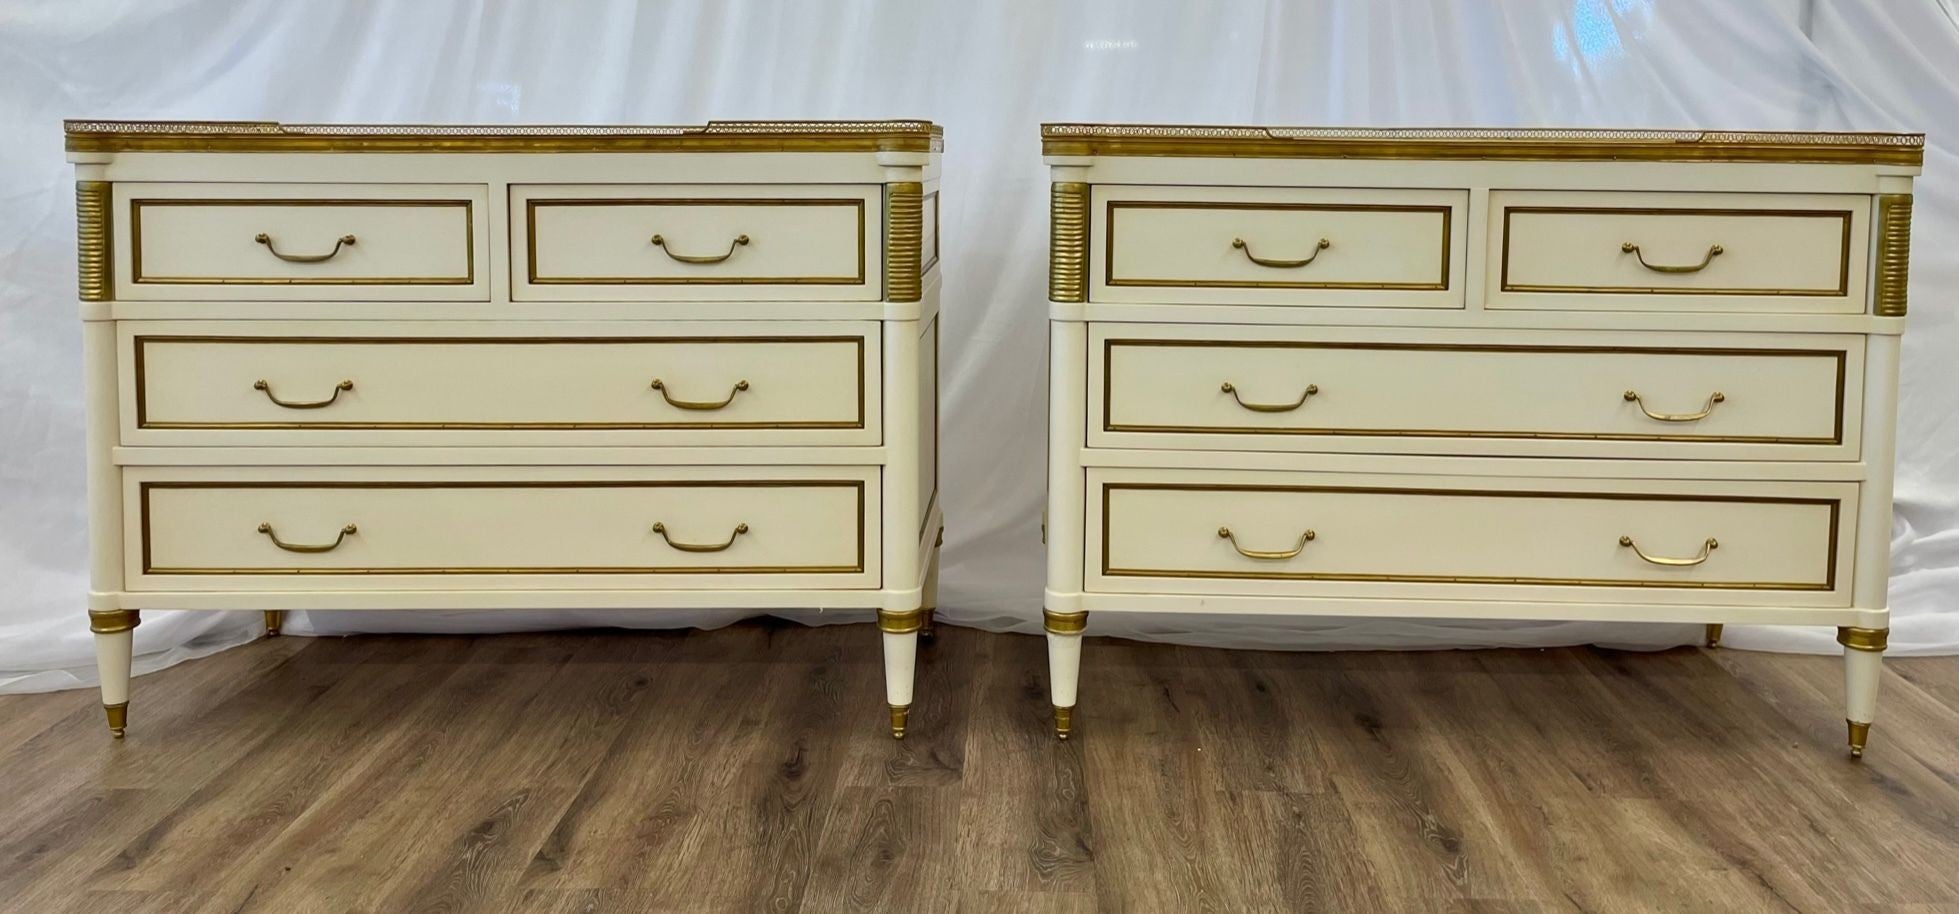 Pair of Cream Painted Louis XVI Style Commodes, Nightstands, Dressers, Chests For Sale